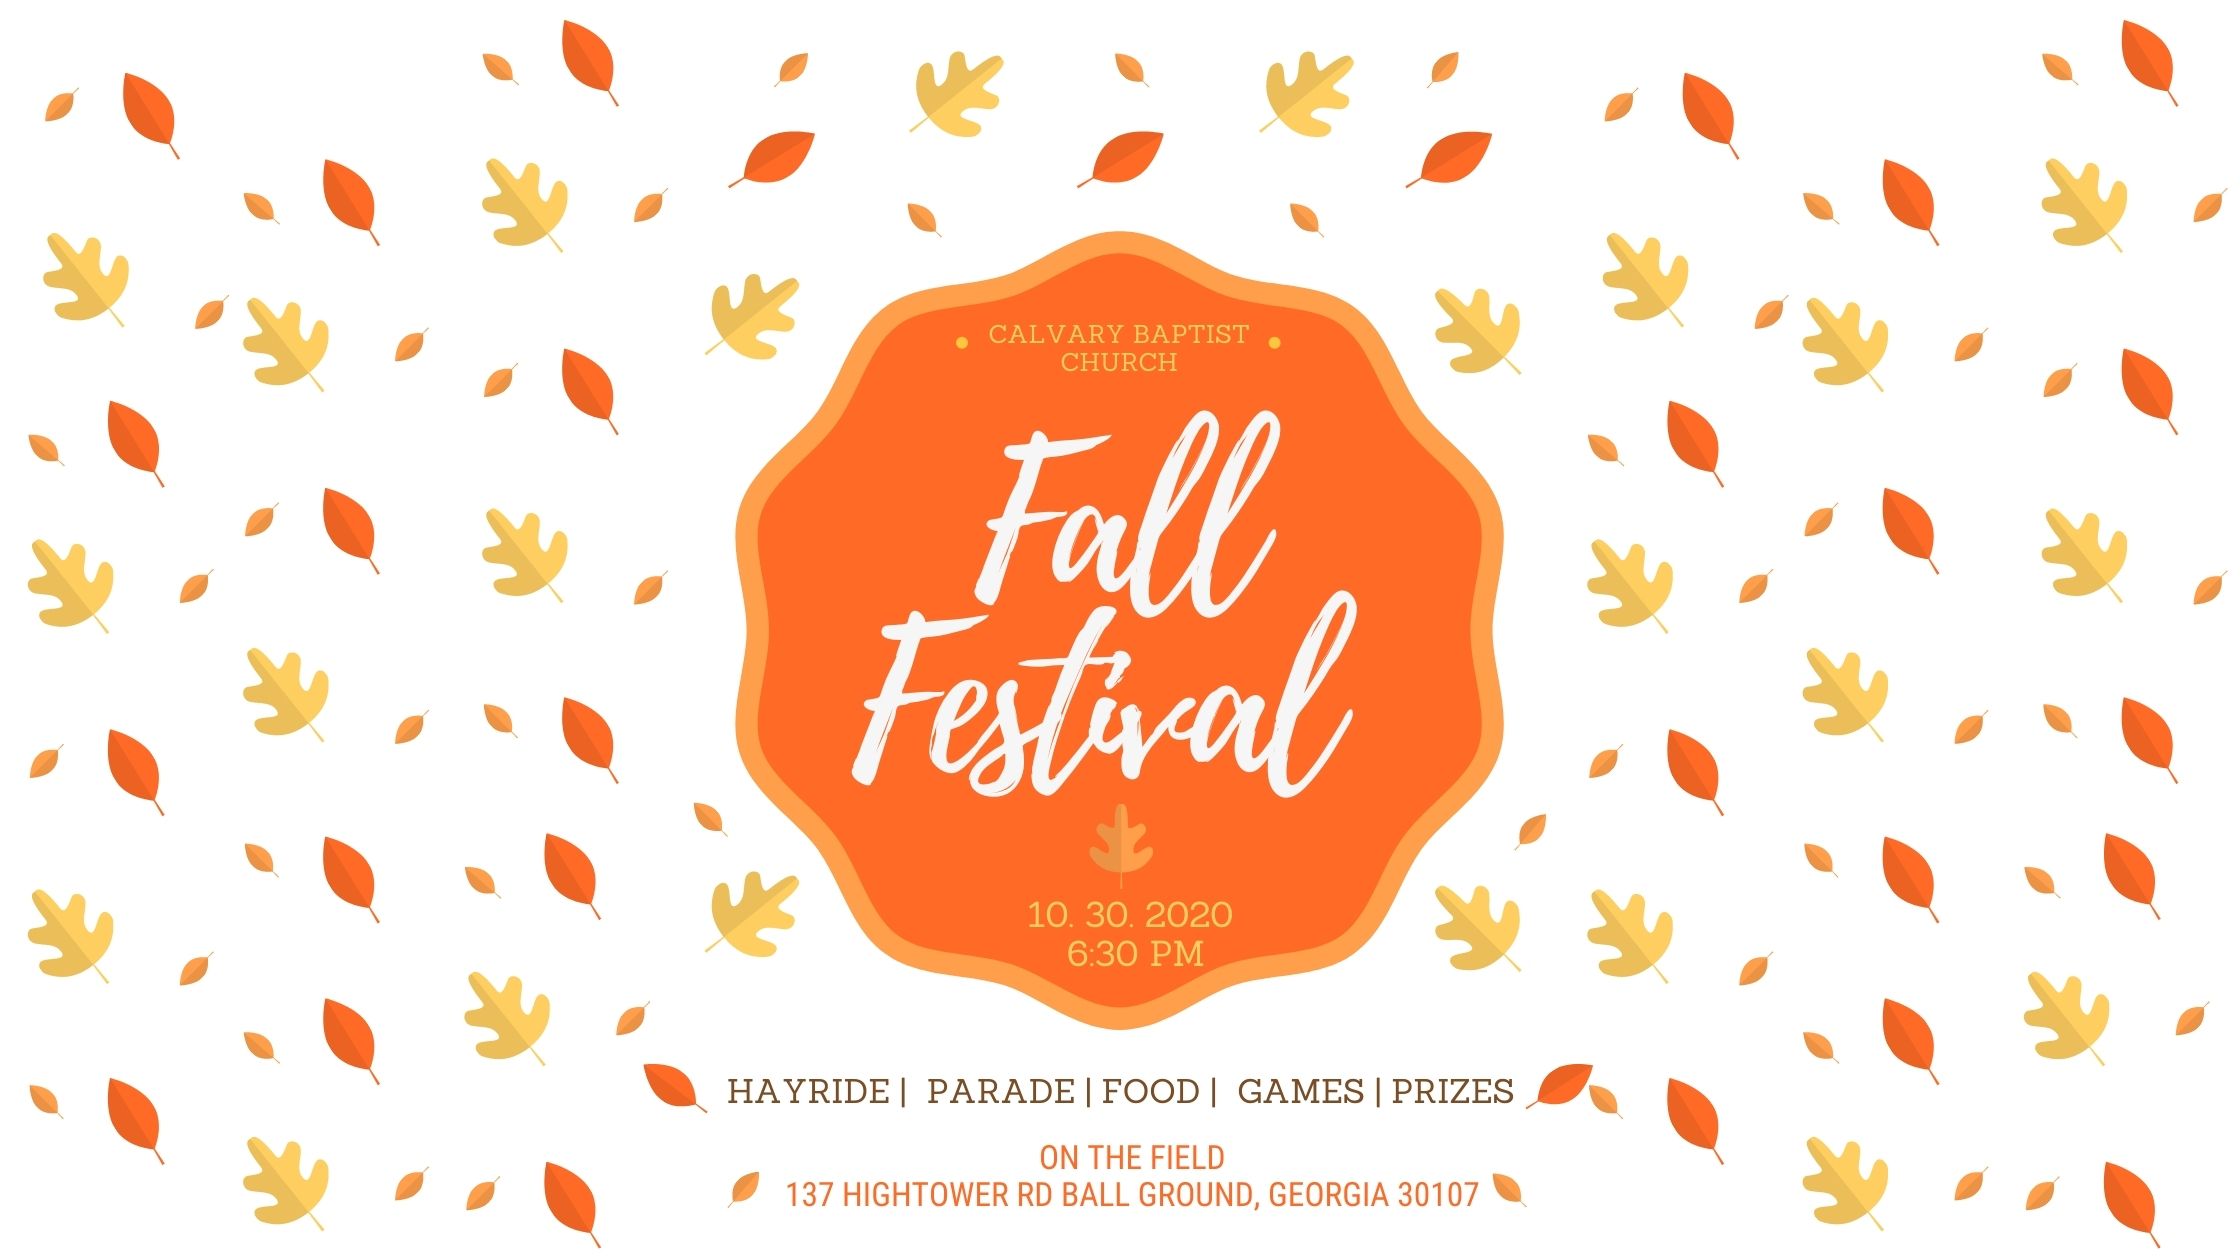 Fall Festival 10-30 at 6:30 PM